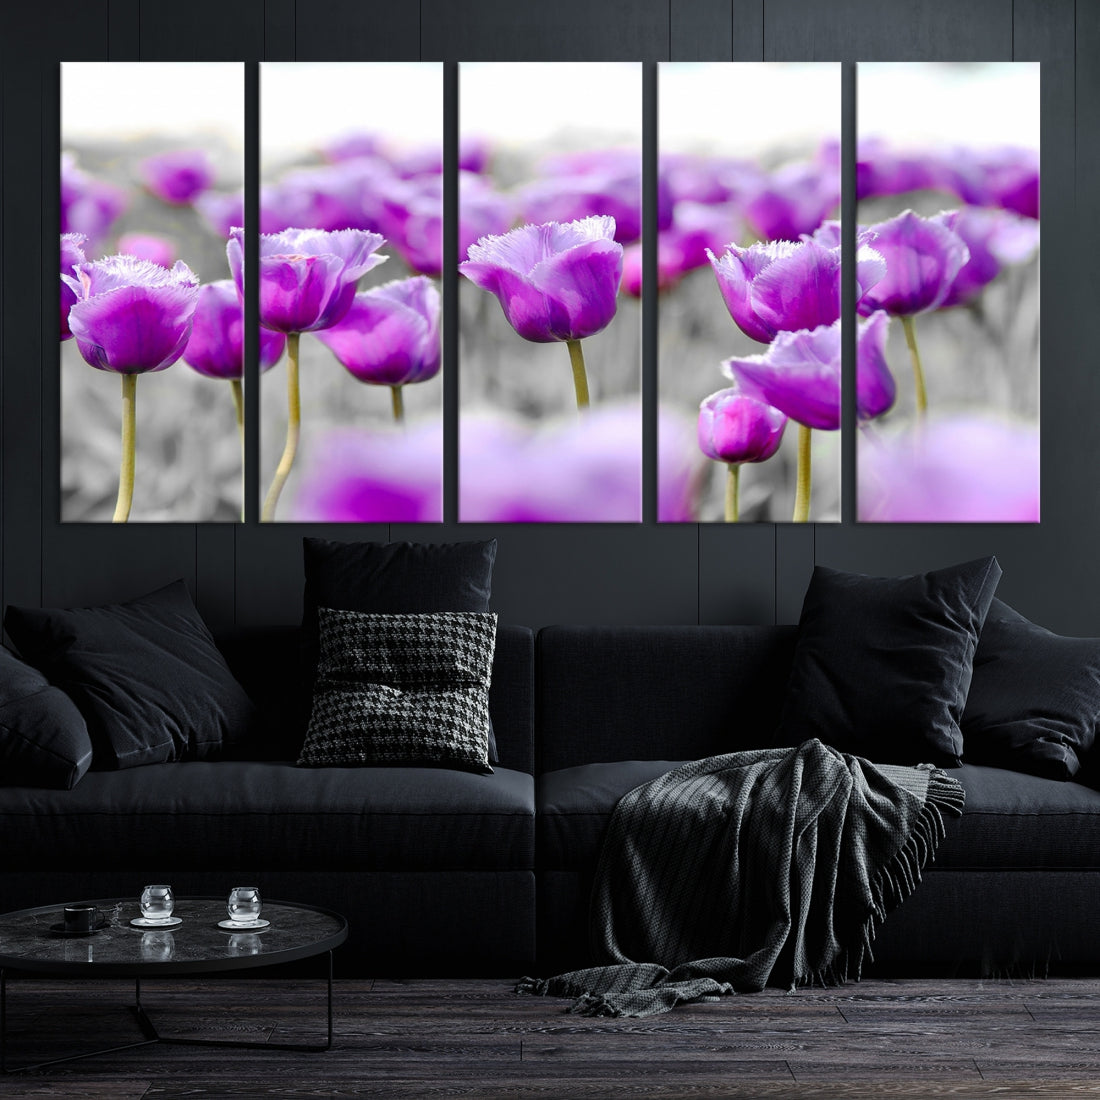 Tulip Fields Canvas Wall Art Print Extra Large Purple Tulips Flower Artwork for Walls